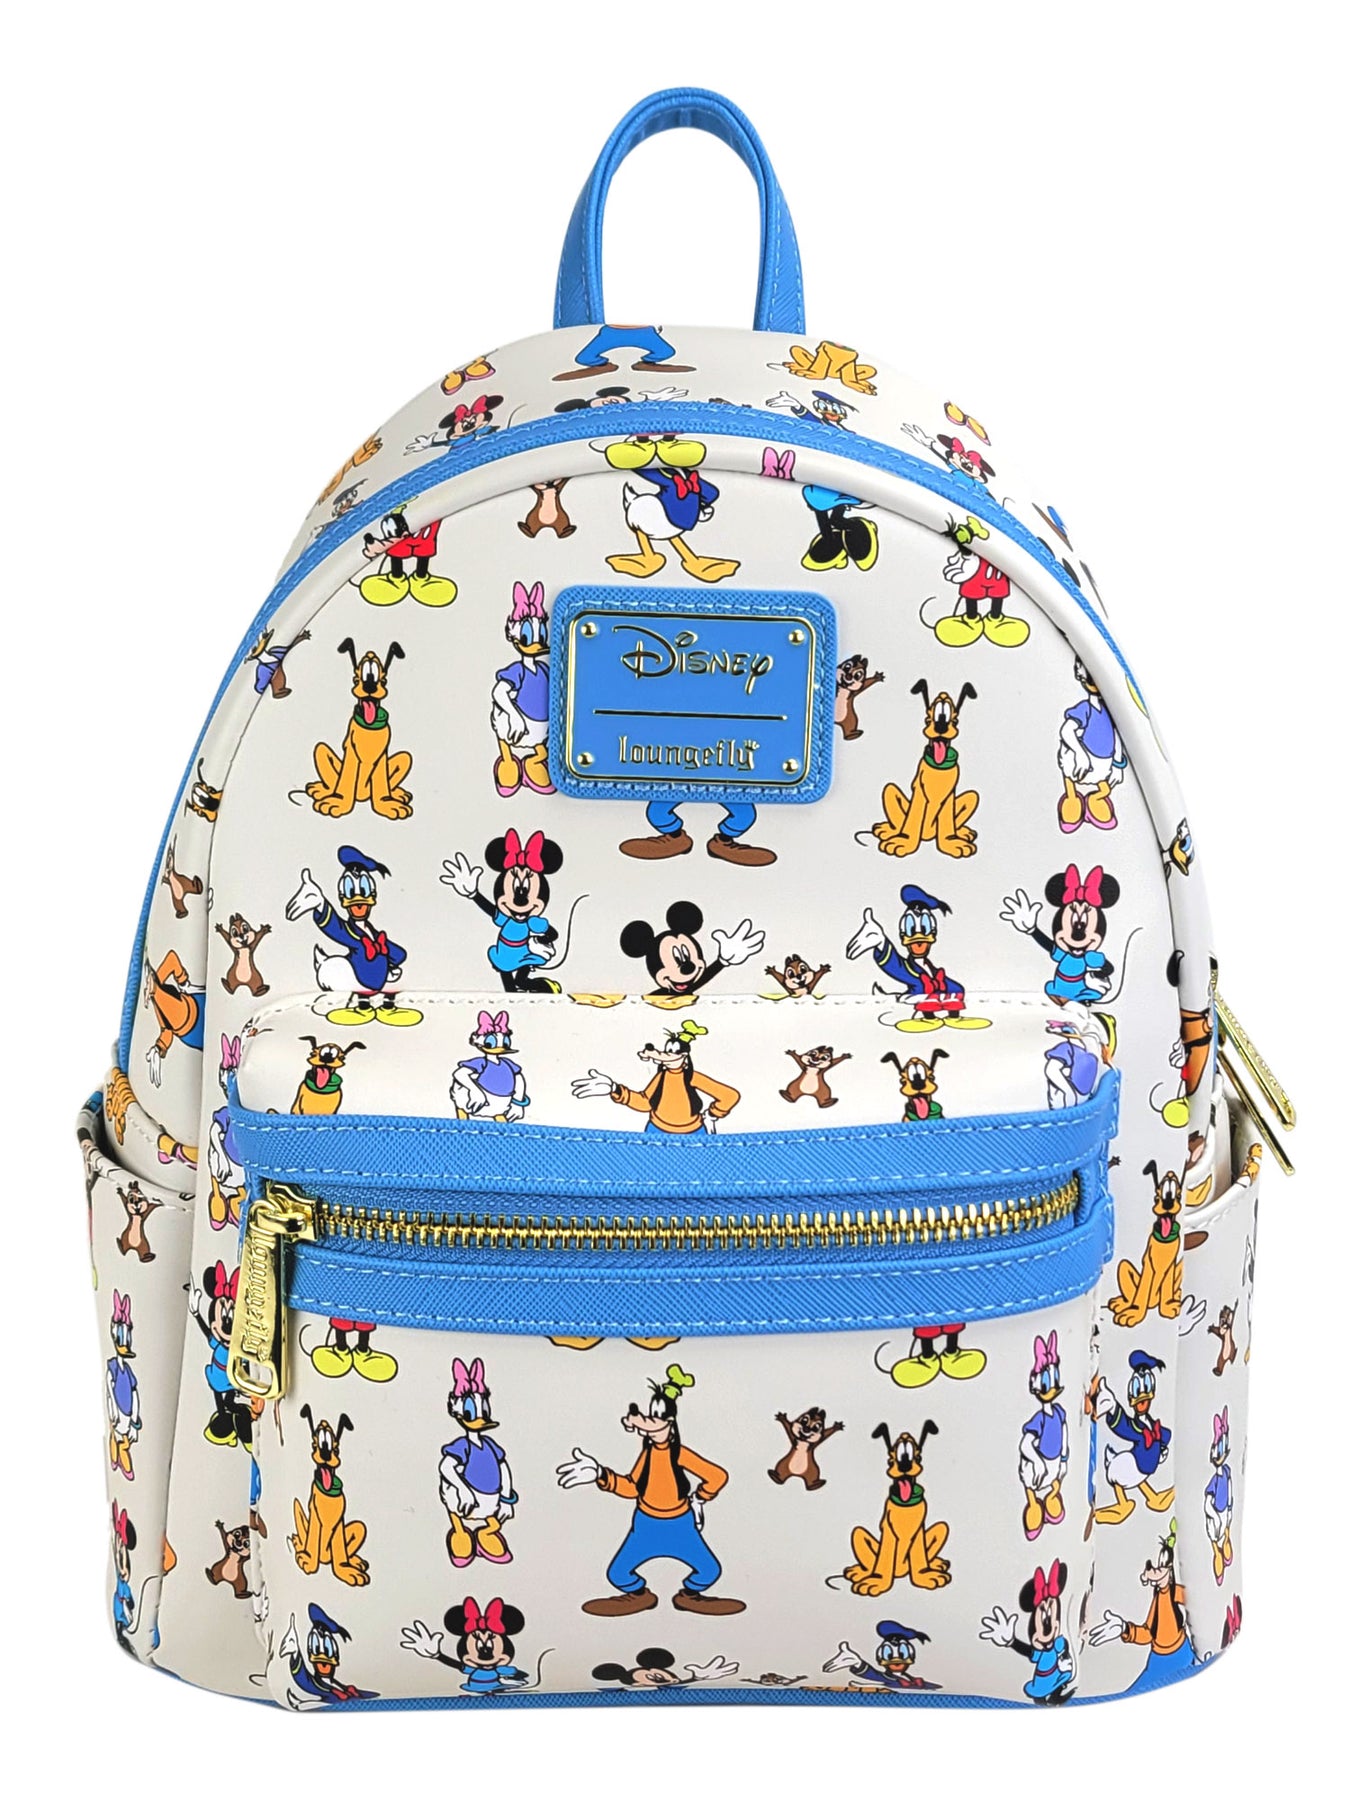 Fashion Women Mickey Mouse Backpack Waterproof High Quality Zipper Bag NEW